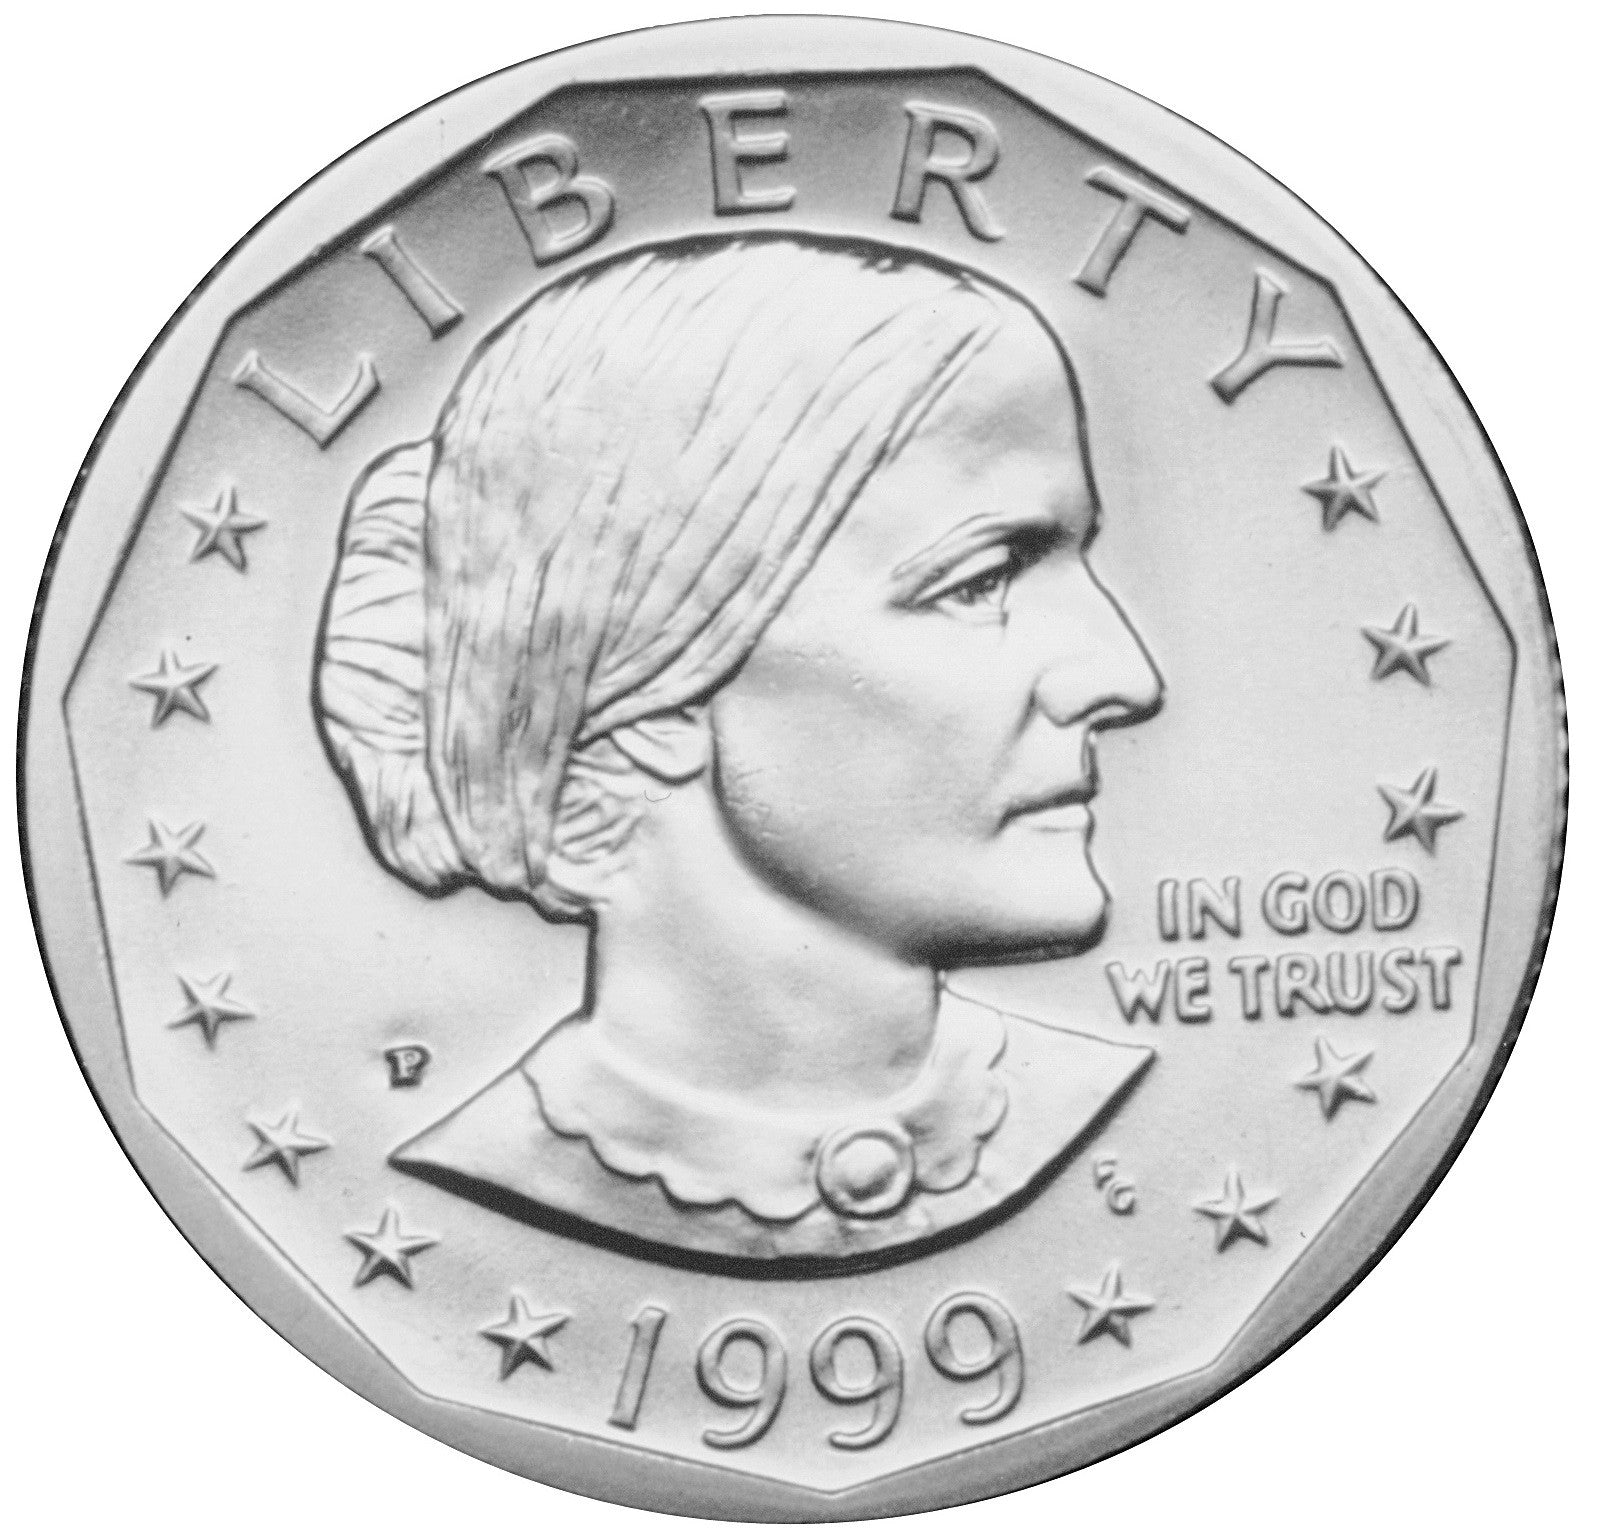 value of susan b anthony dollar coin